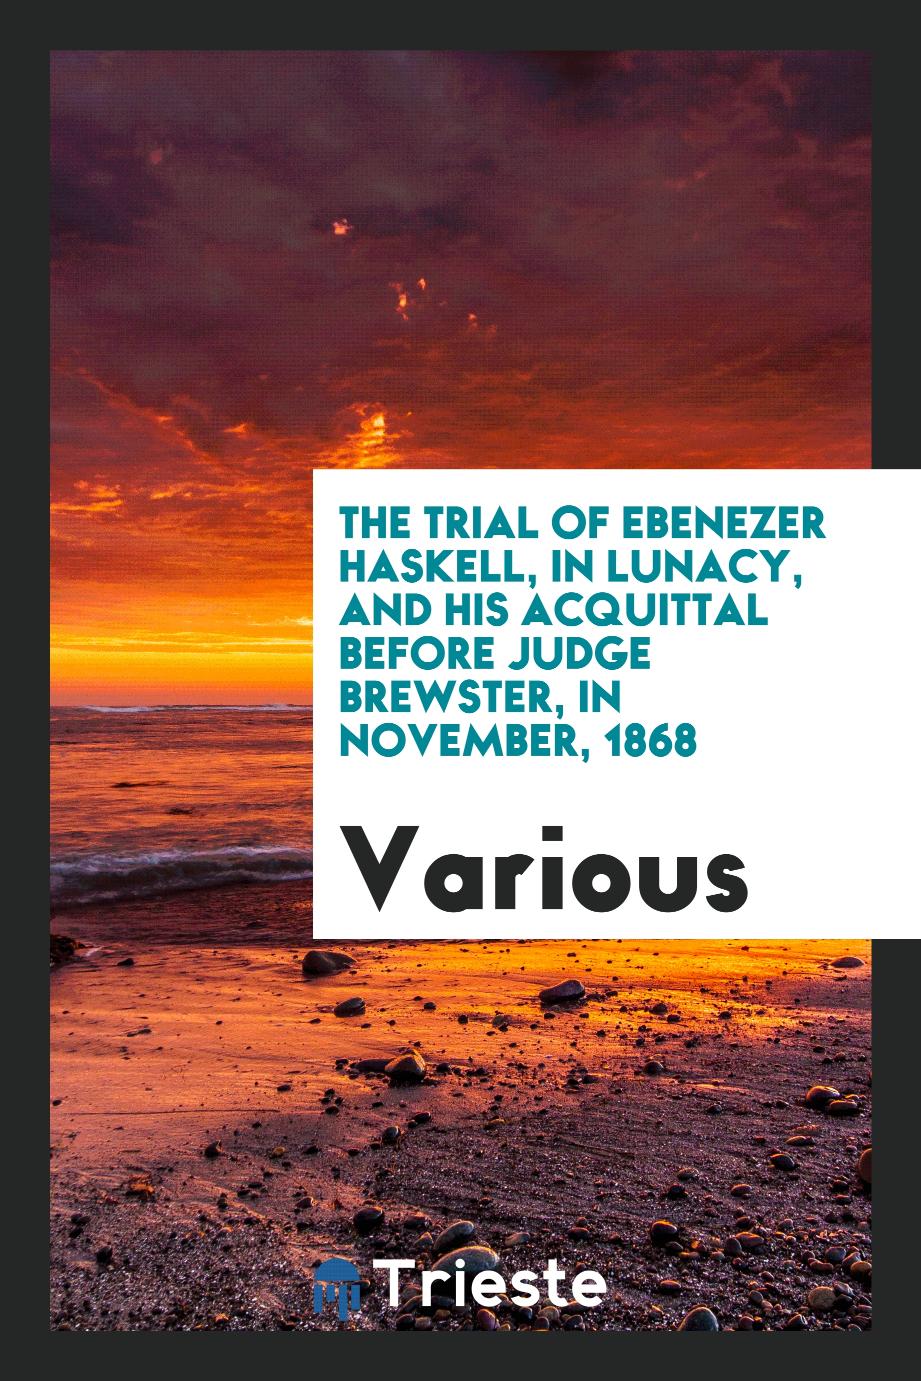 The Trial of Ebenezer Haskell, in Lunacy, and His Acquittal before Judge Brewster, in November, 1868